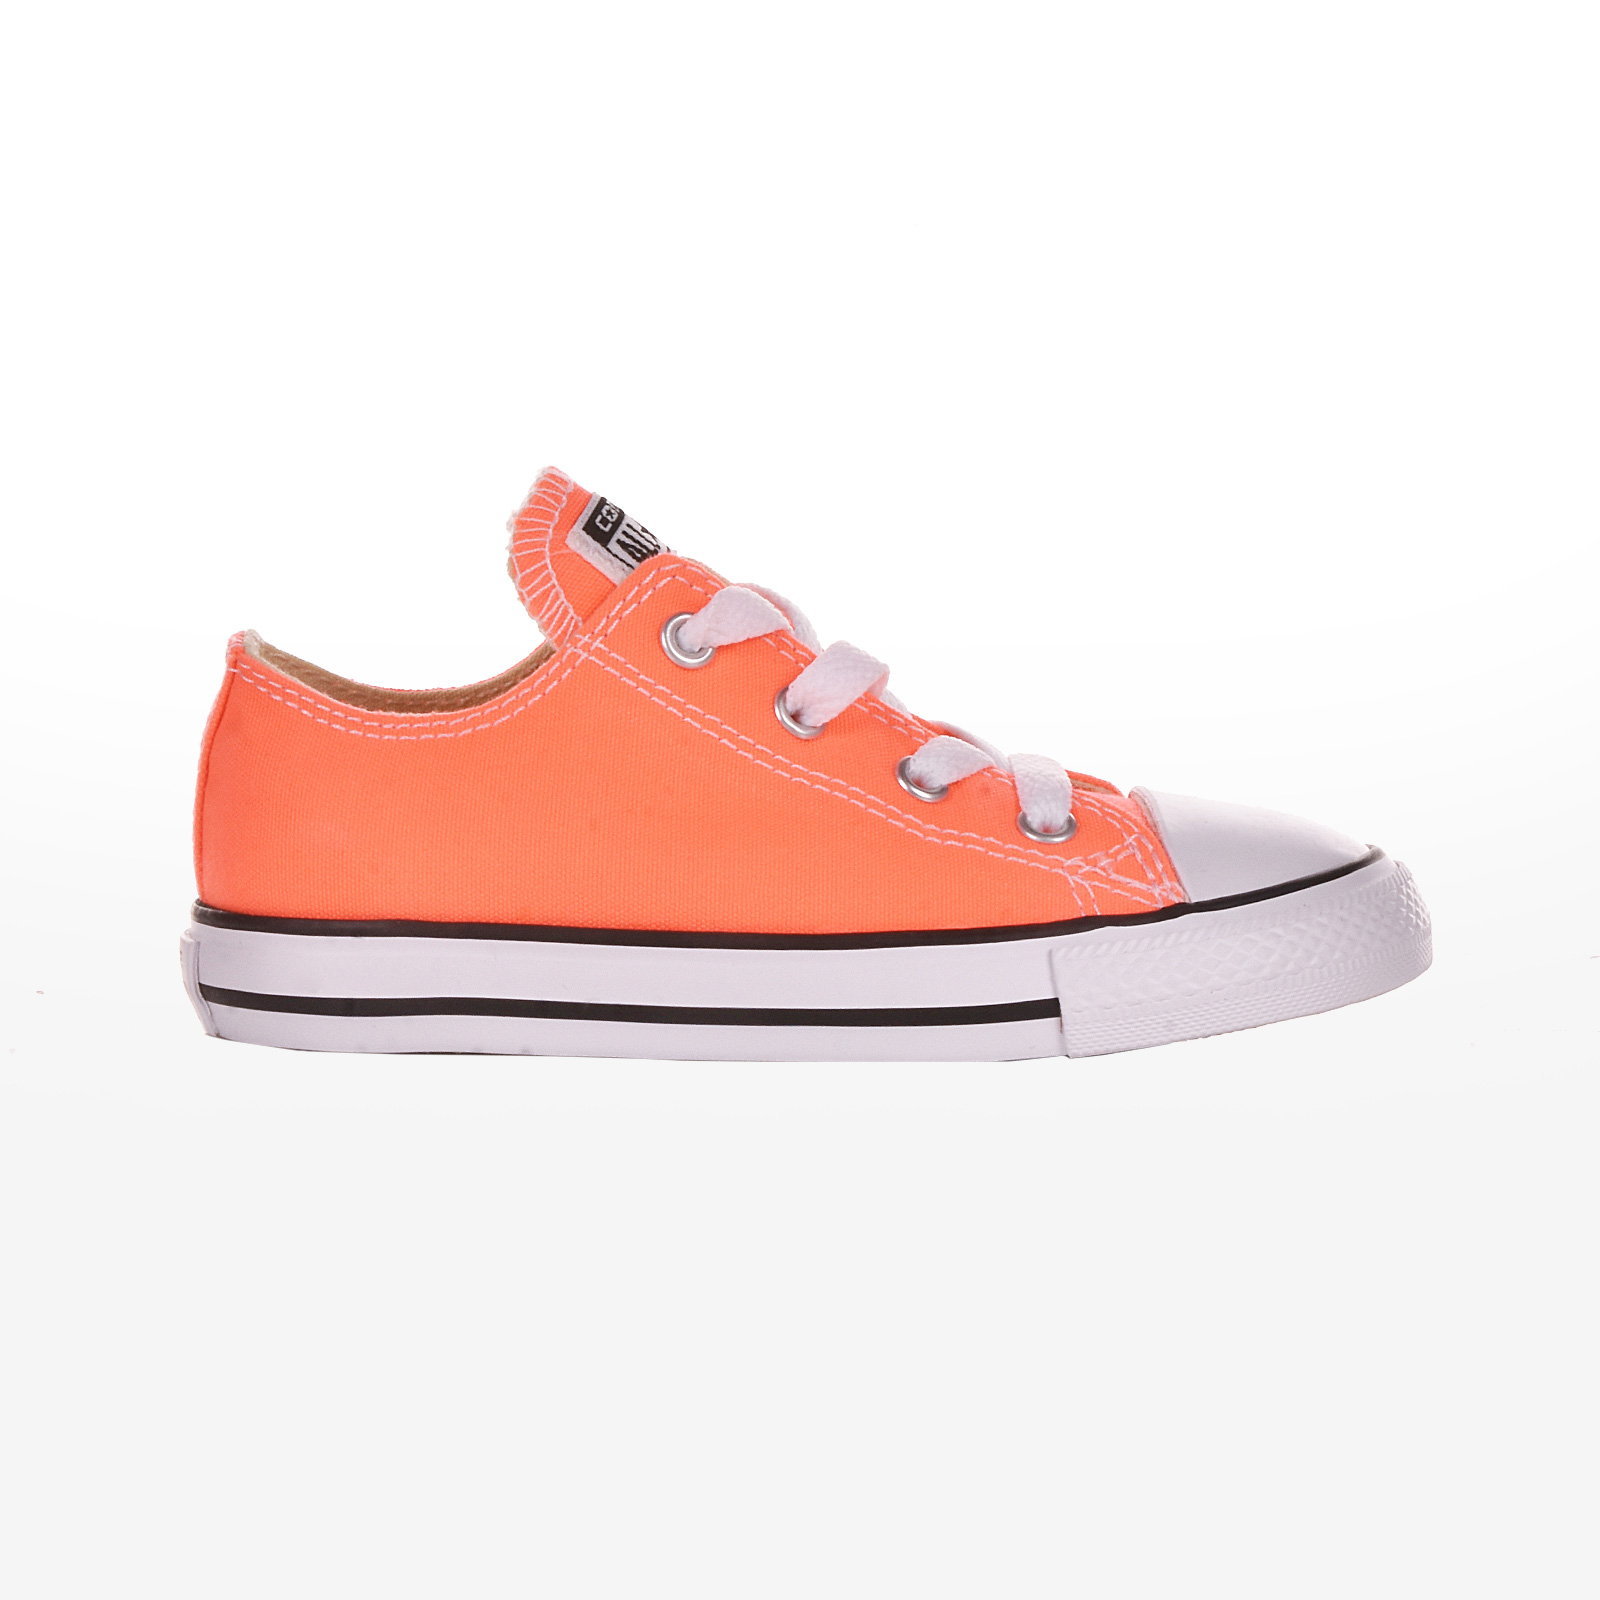 Converse - 755736C CHUCK TAYLOR ALL STAR - 00O6 Παιδικά > Παπούτσια > Sneaker > Παπούτσι Low Cut